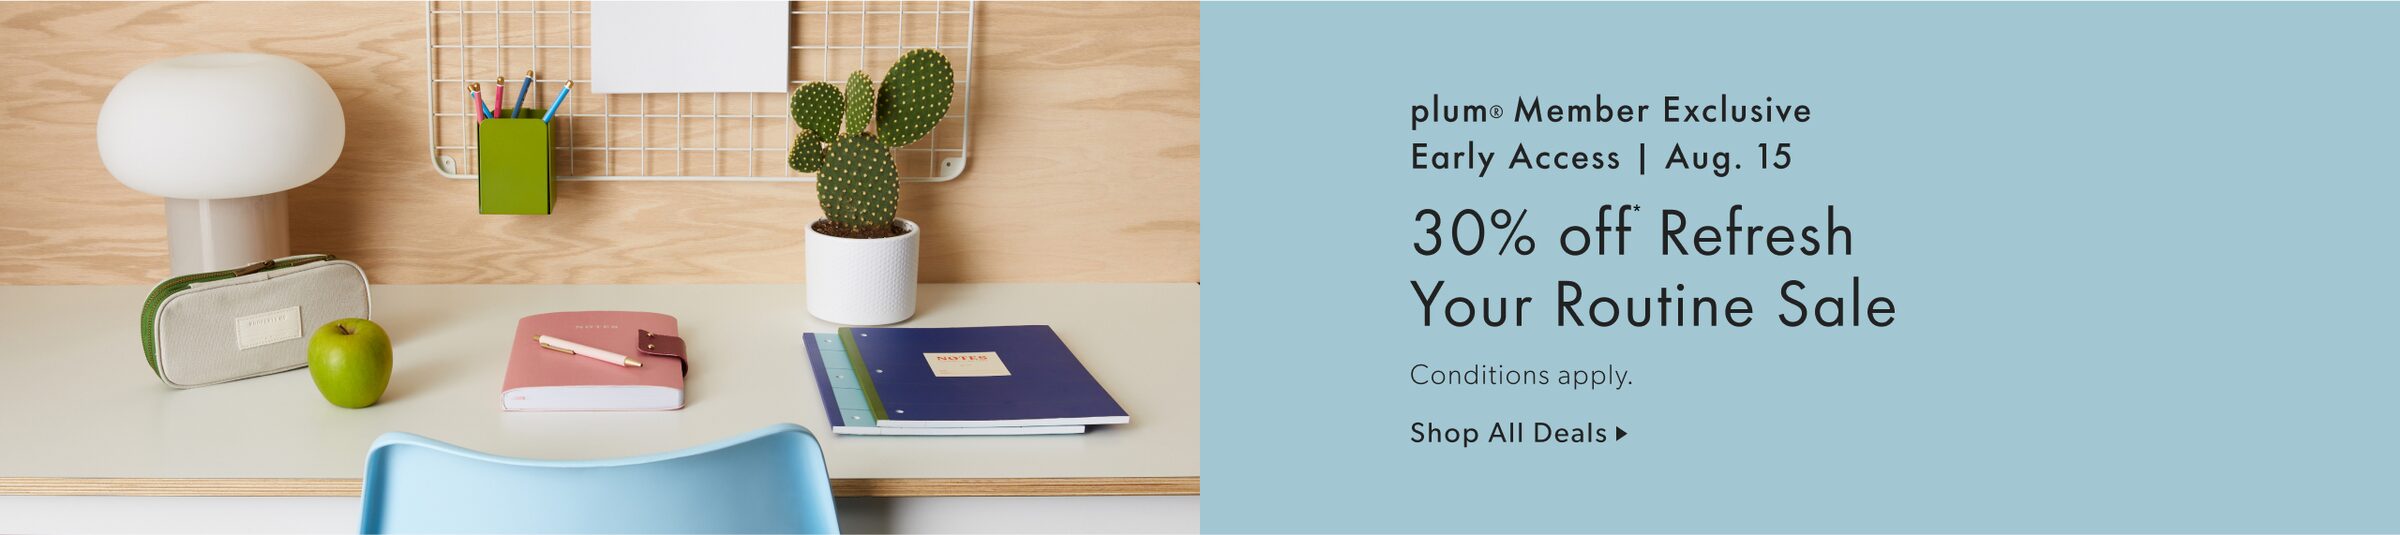 plum member exclusive - early access - The Refresh Your Routine Sale - August 15